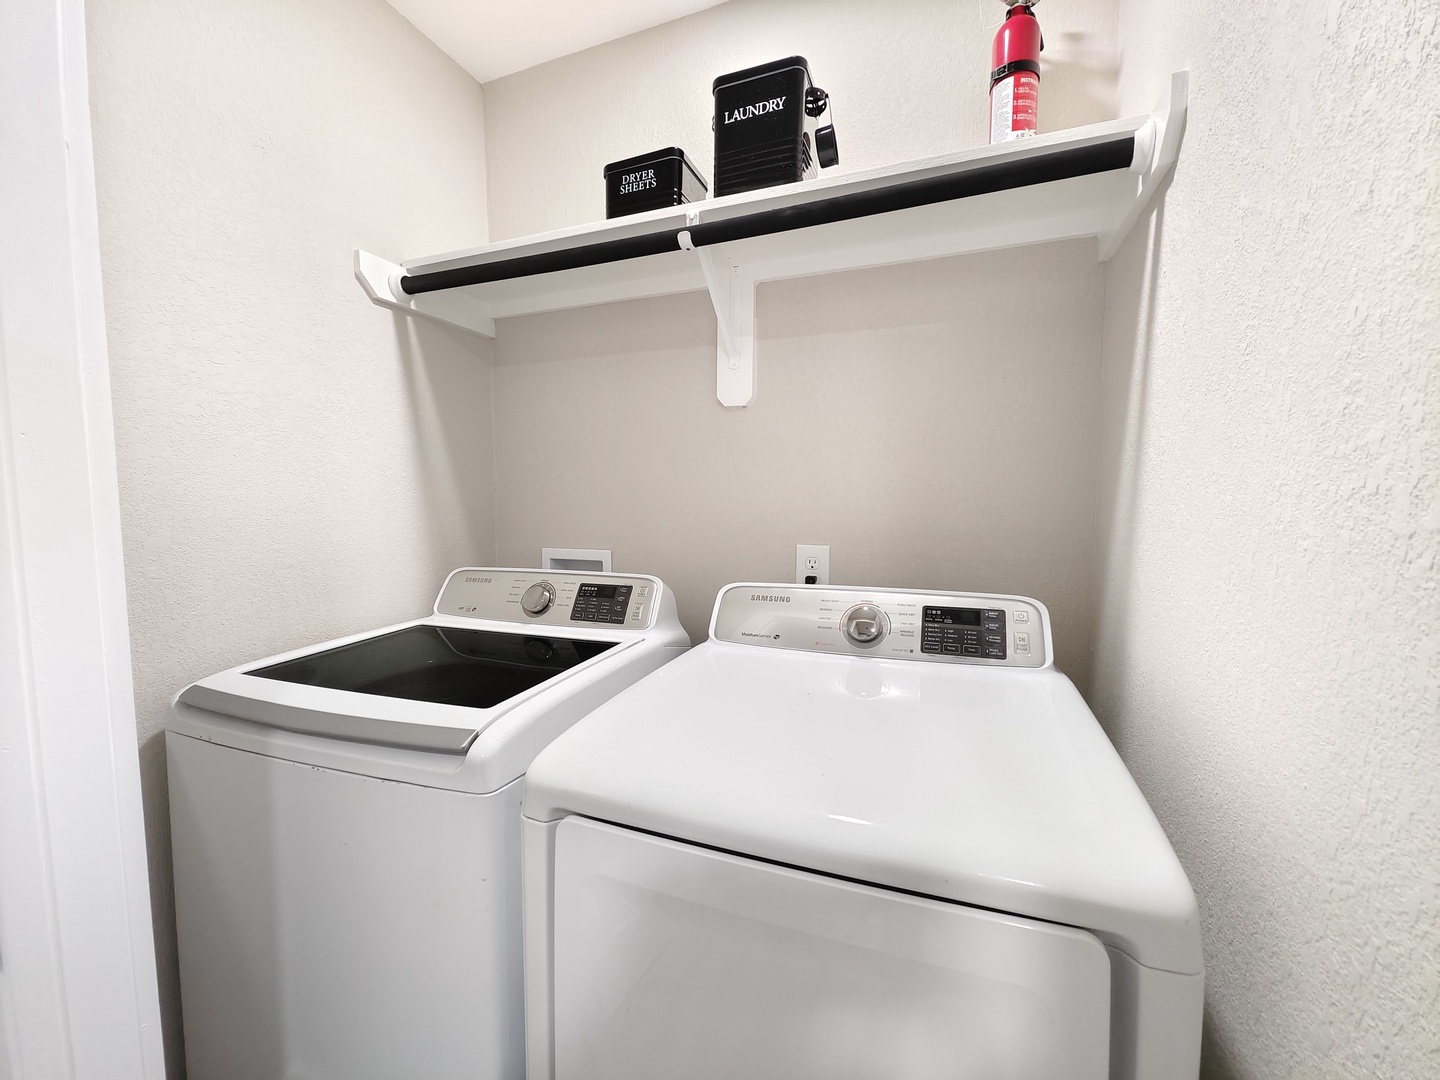 Private laundry is available for your stay, tucked away by the kitchen